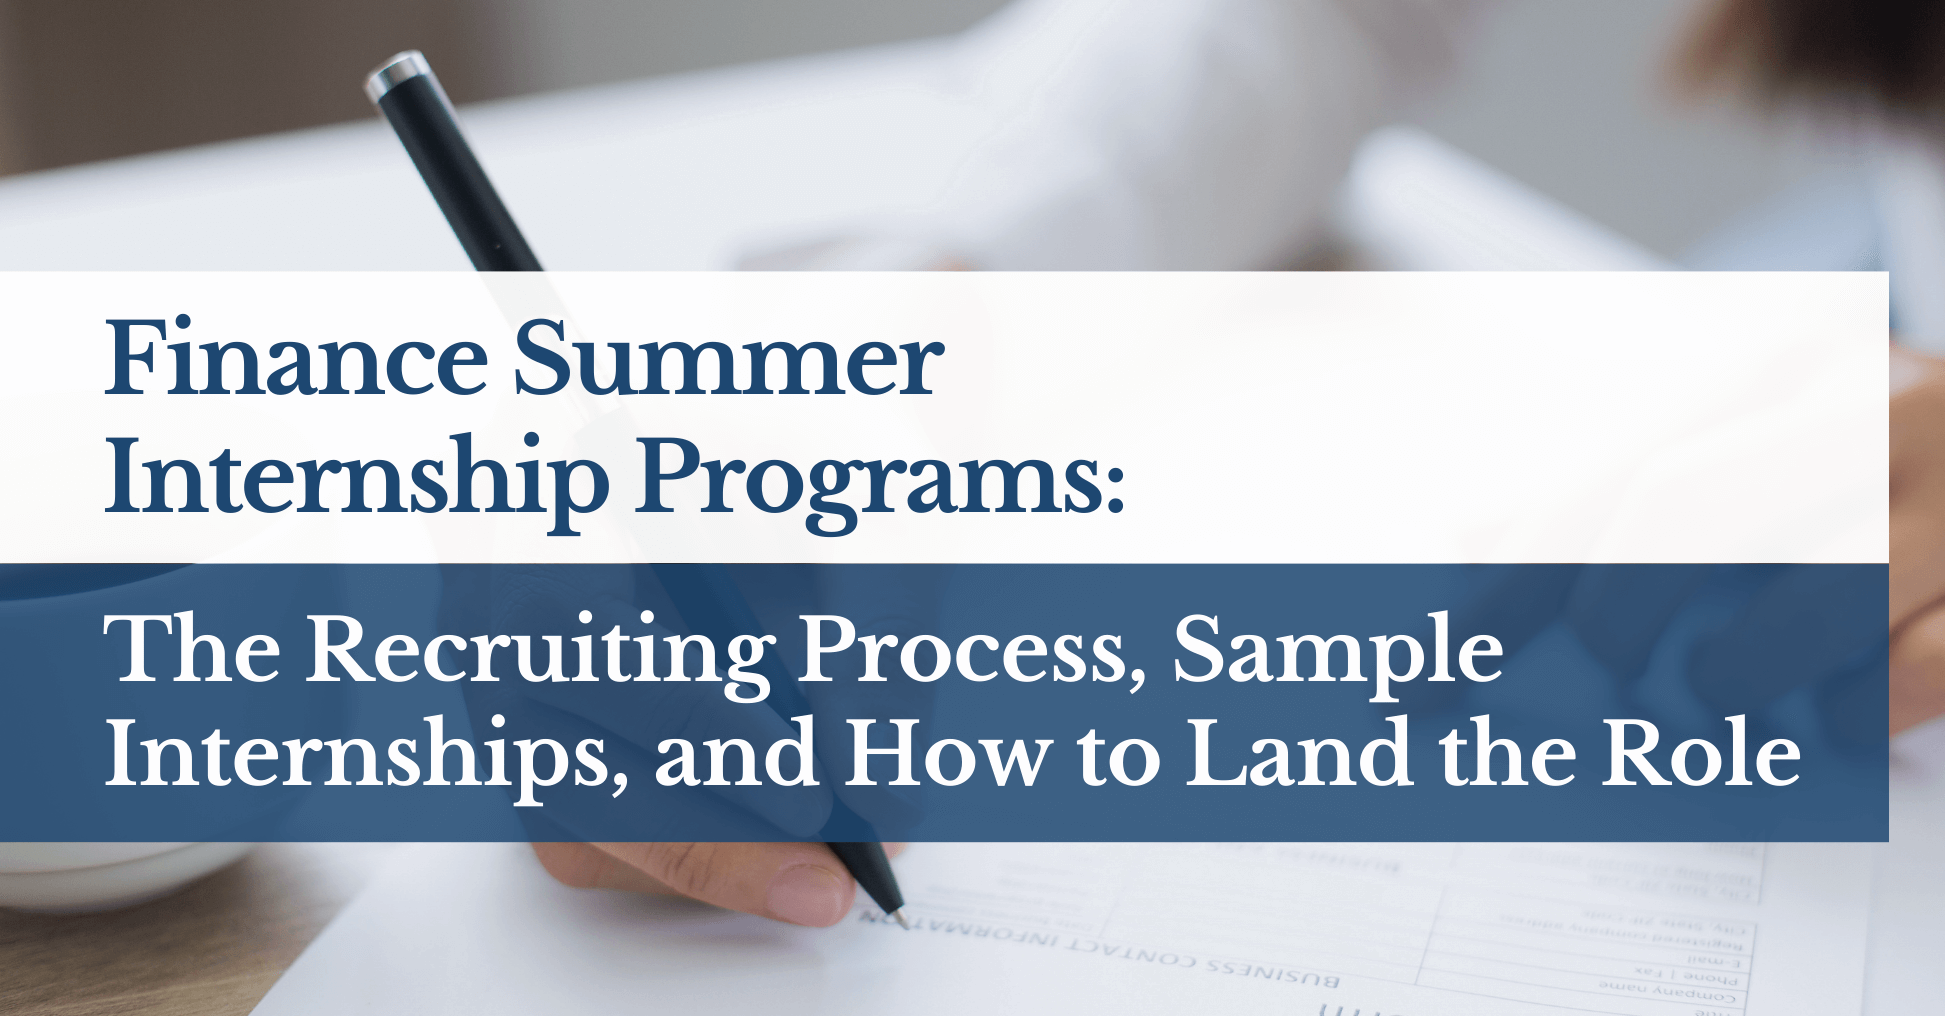 2022 Finance Summer Internship Programs: The Recruiting Process, Sample Internships, and How to Land the Role